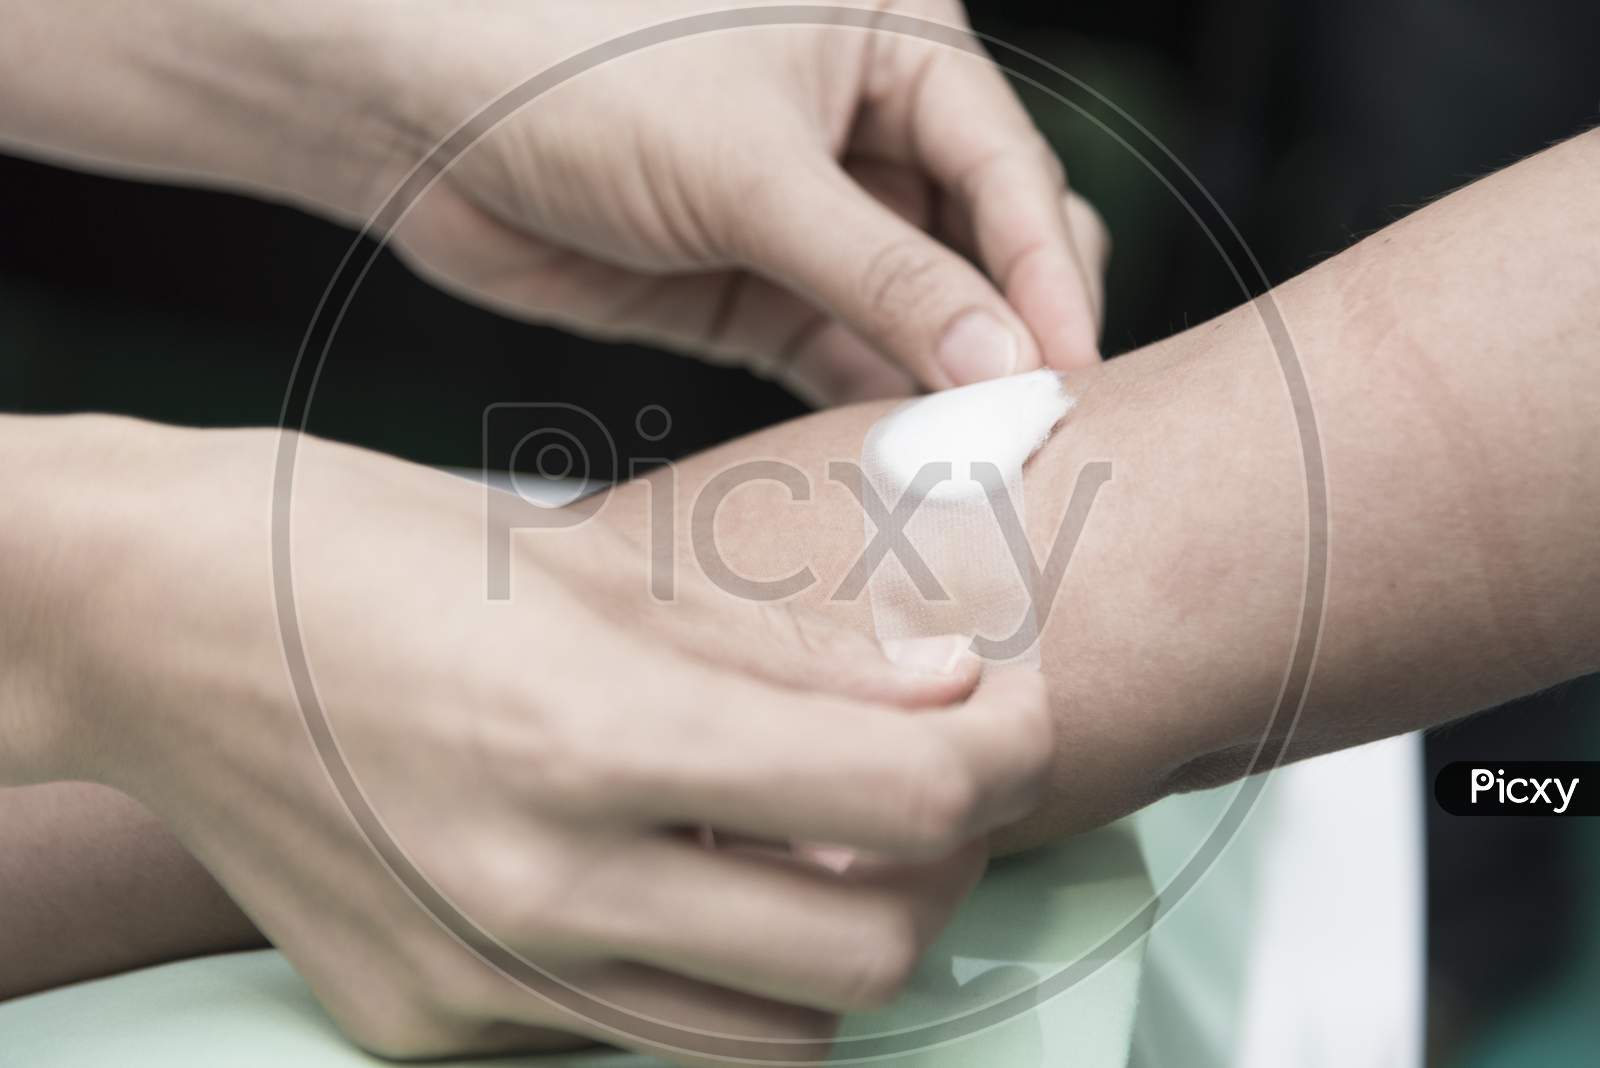 Healing Wound From Blood Collect Of Physical Examination, Hospital And First Aid Concept